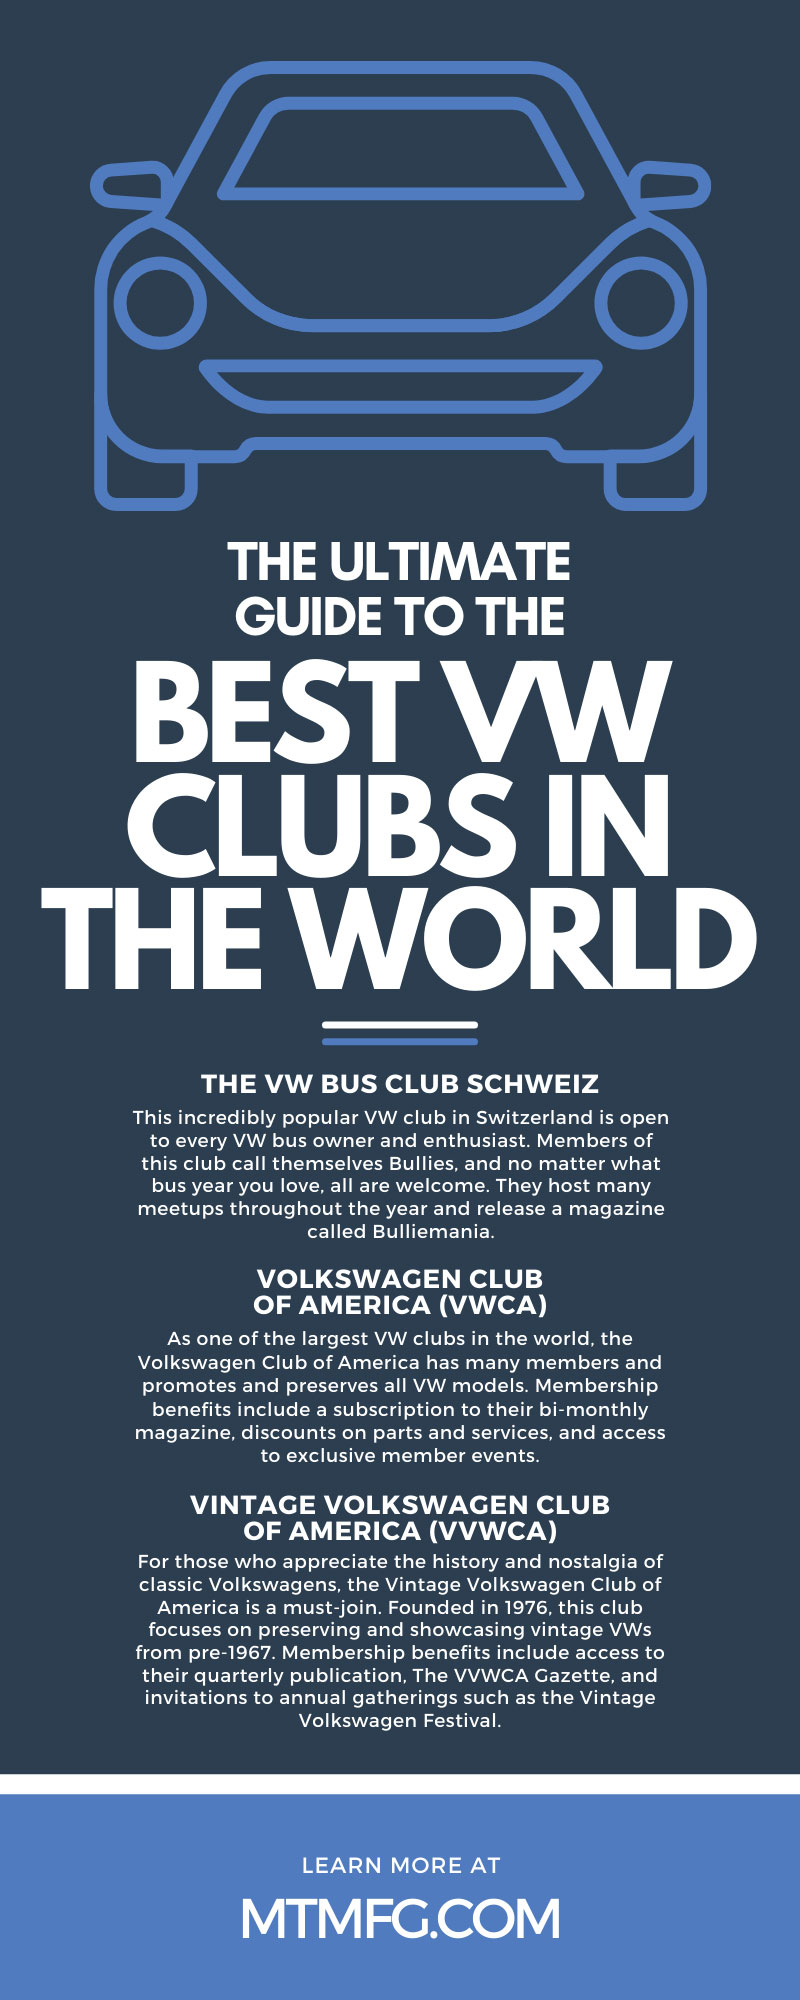 The Ultimate Guide to the Best VW Clubs in the World